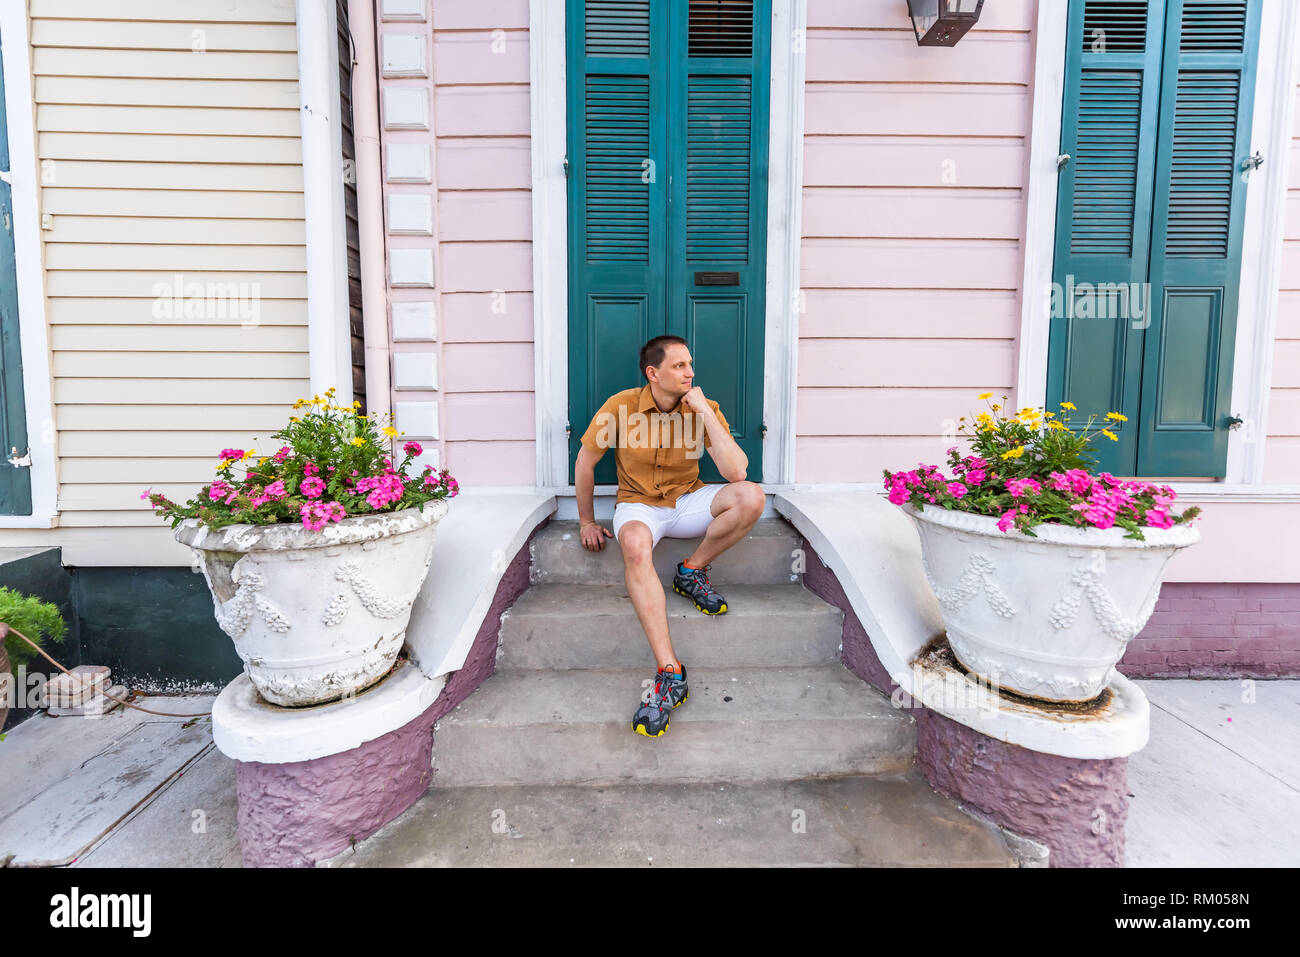 Young local man sitting smiling happy on stairs steps front porch in New Orleans by colorful pink blue green door architecture with yellow flowers in  Stock Photo